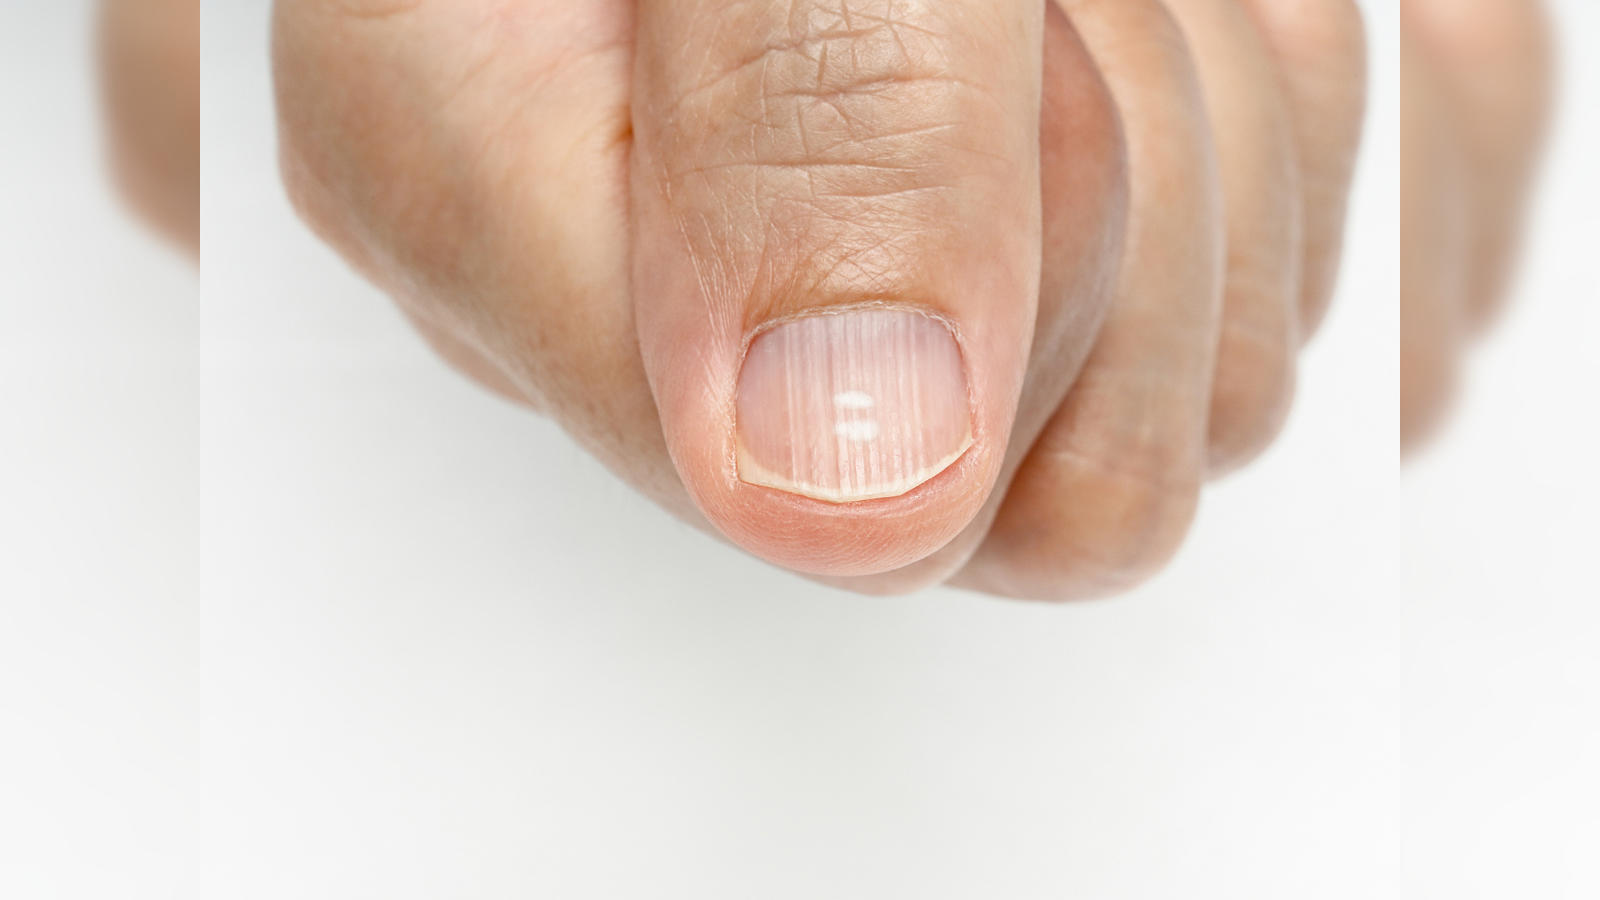 Fingernails turning blue- Causes, treatment, and more | Optum Perks